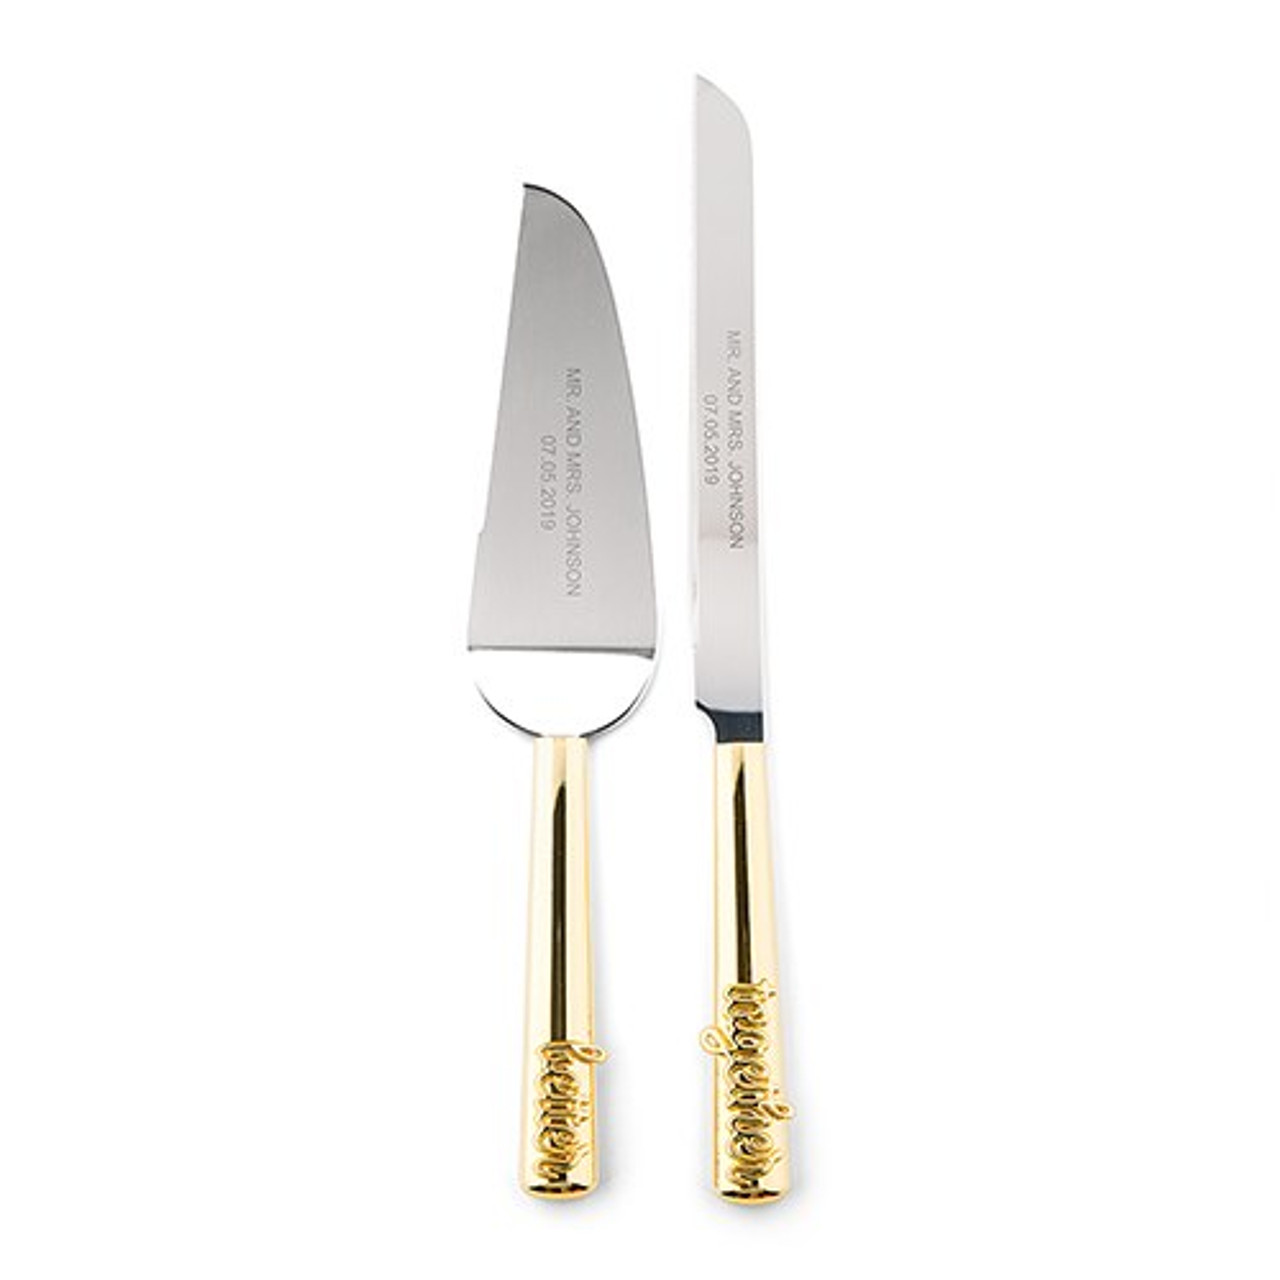 https://cdn11.bigcommerce.com/s-h9yhhjf2jt/images/stencil/1280x1280/products/604/4176/4638-55-w_gold-wedding-cake-knife-and-server-better-together92eee0c30a6011a7428bcc39cd849d1e__74619.1506718487.jpg?c=2